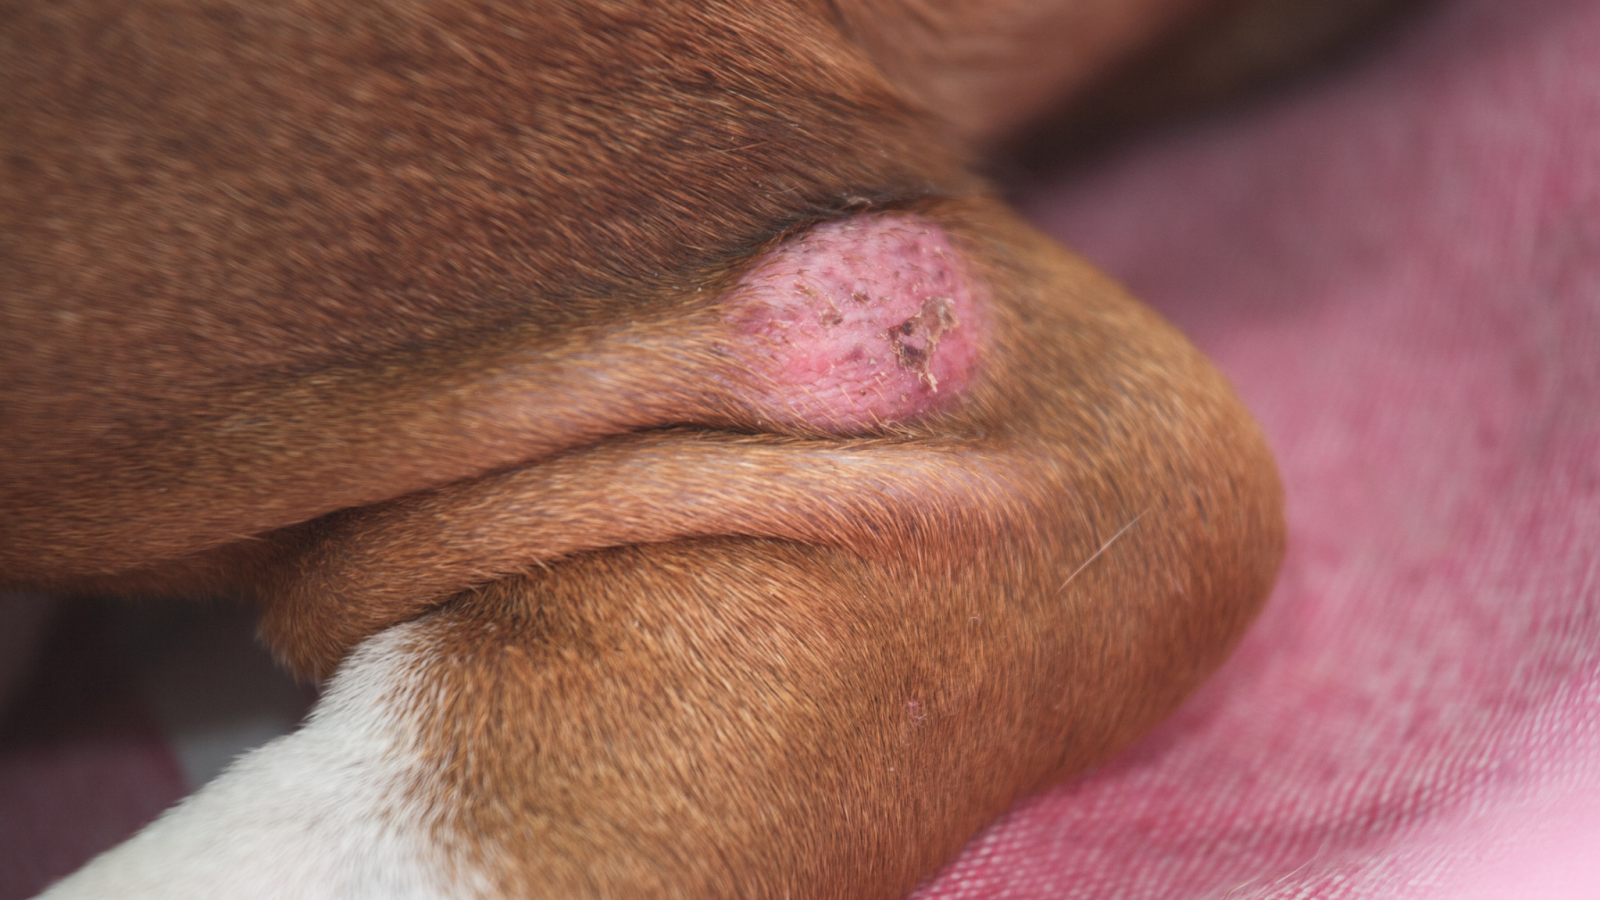 Ring worm on a dog causing a bald patch with no hair and tiny scabs